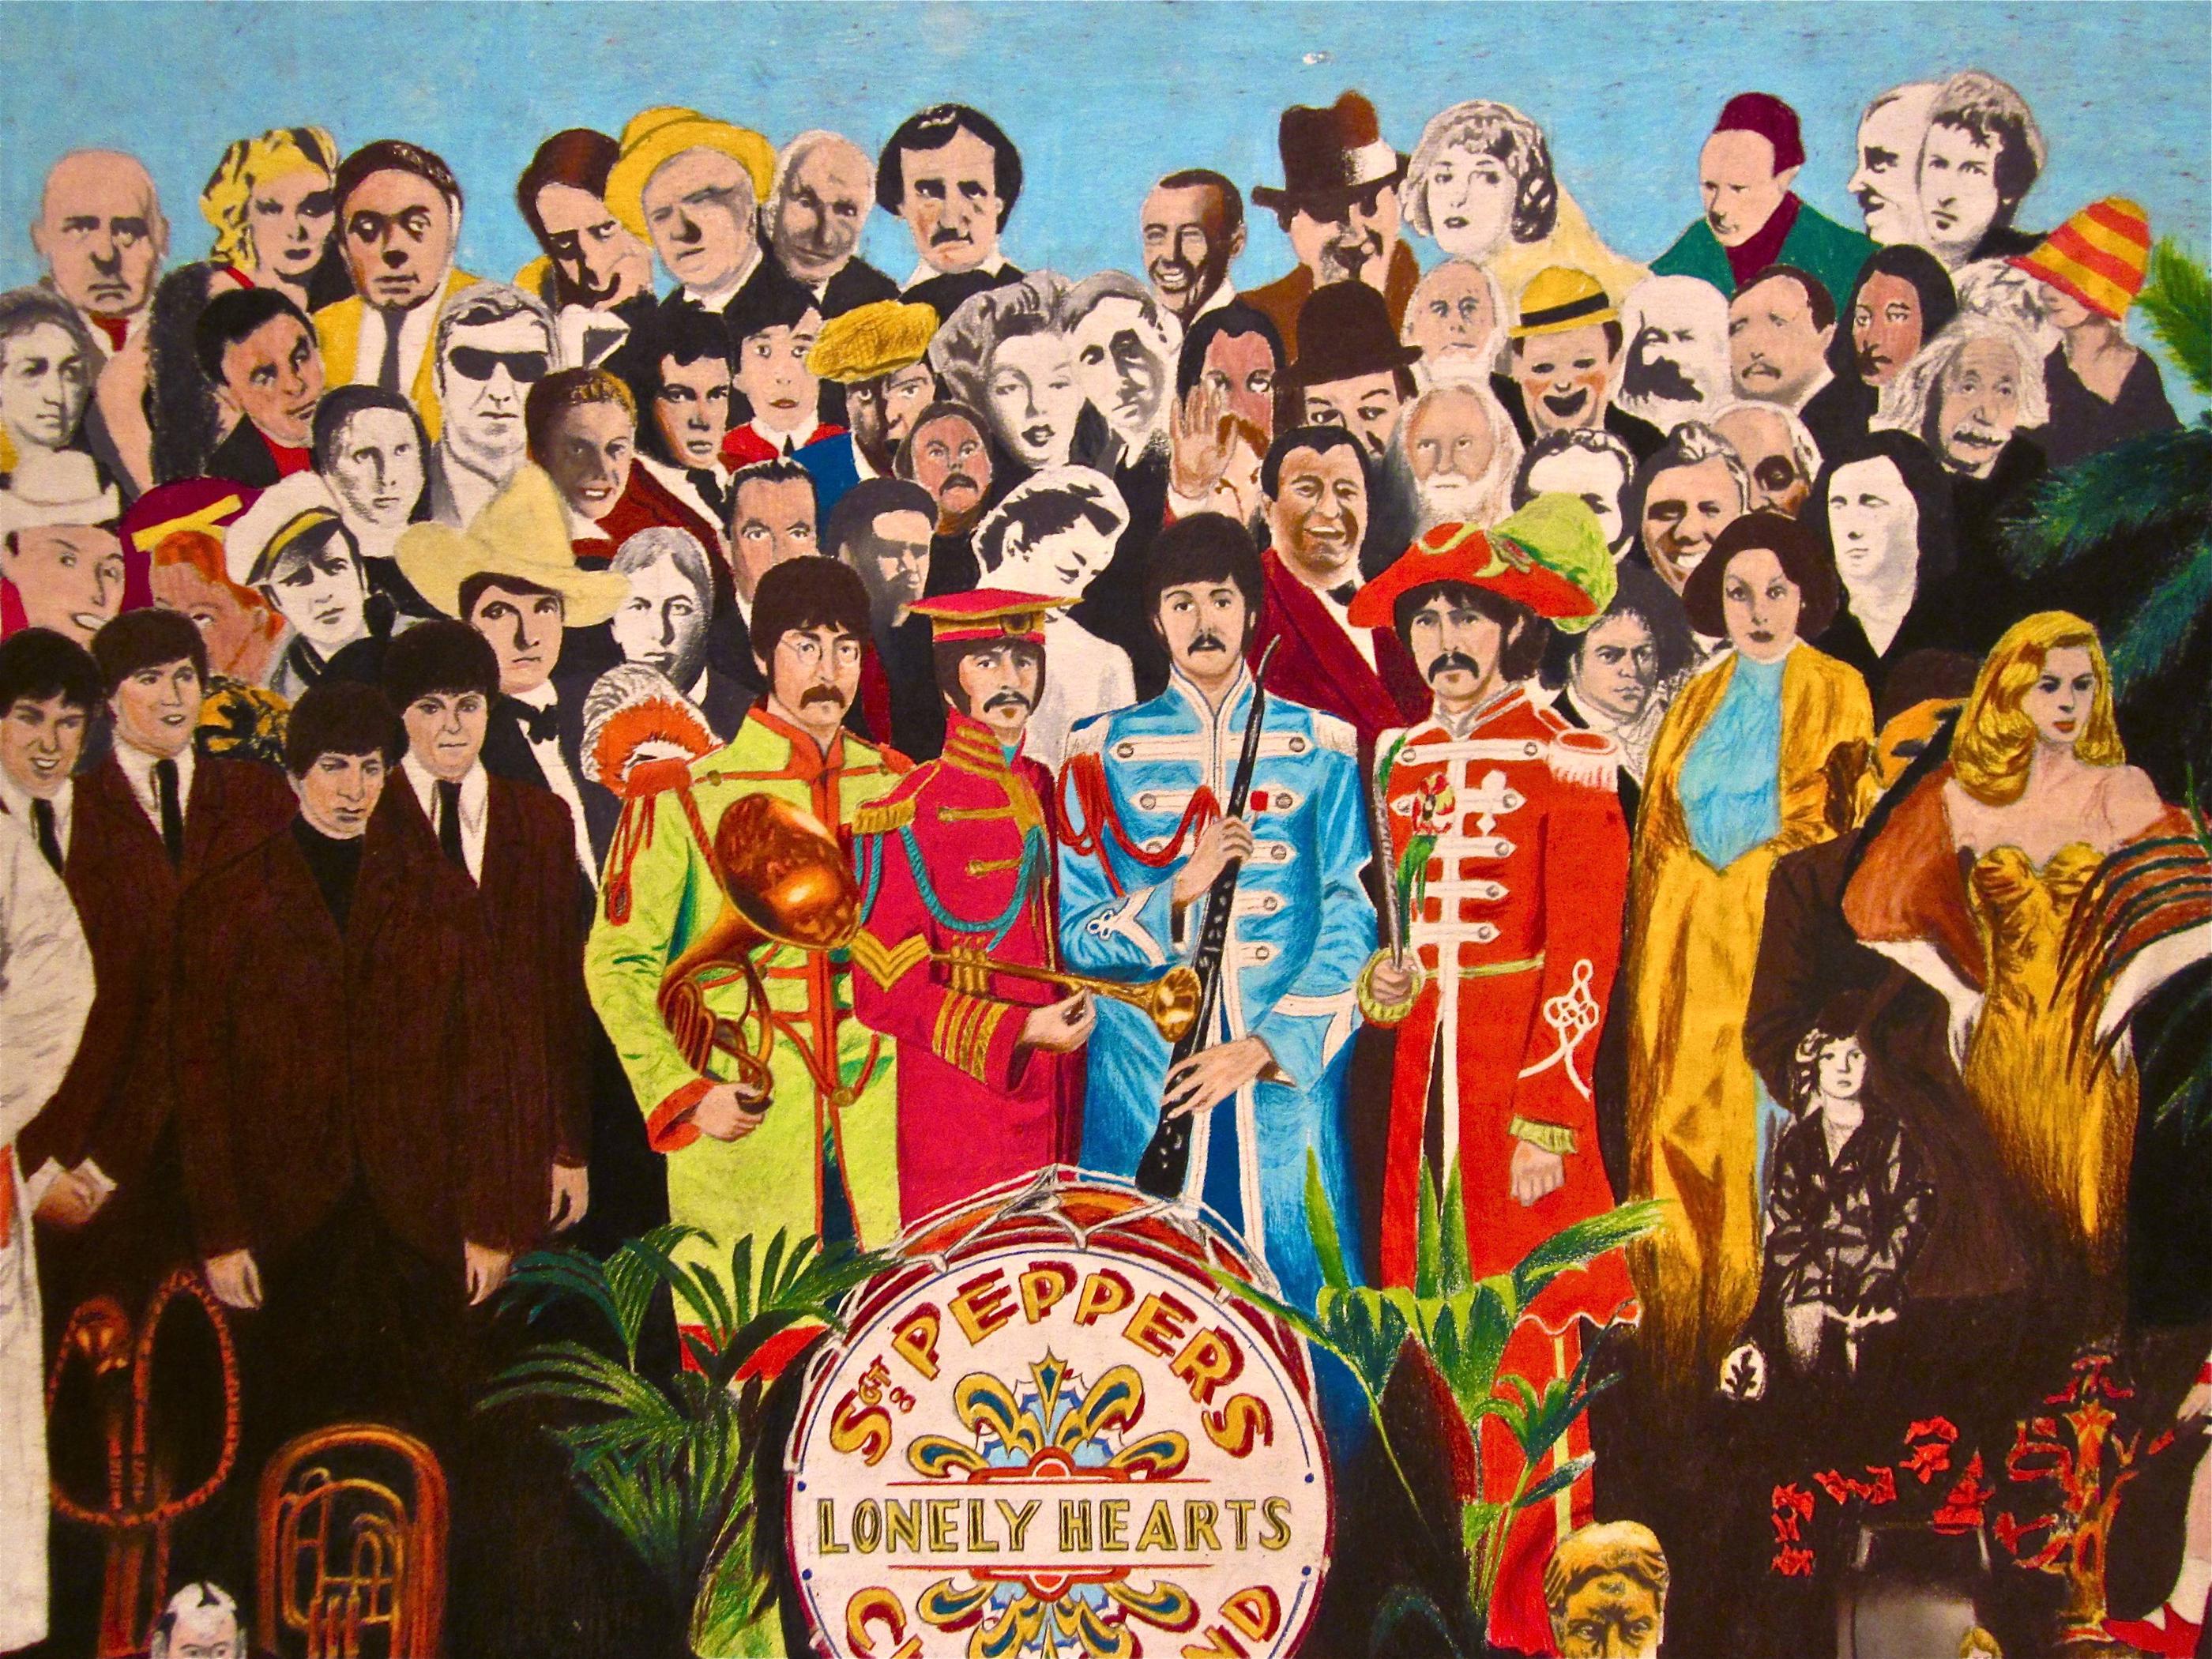 Beatles sgt peppers lonely hearts club. The Beatles сержант Пеппер. Sgt. Pepper’s Lonely Hearts Club Band the Beatles. Sgt Pepper s Lonely Hearts Club Band. Sgt. Pepper's Lonely Hearts Club Band Битлз.